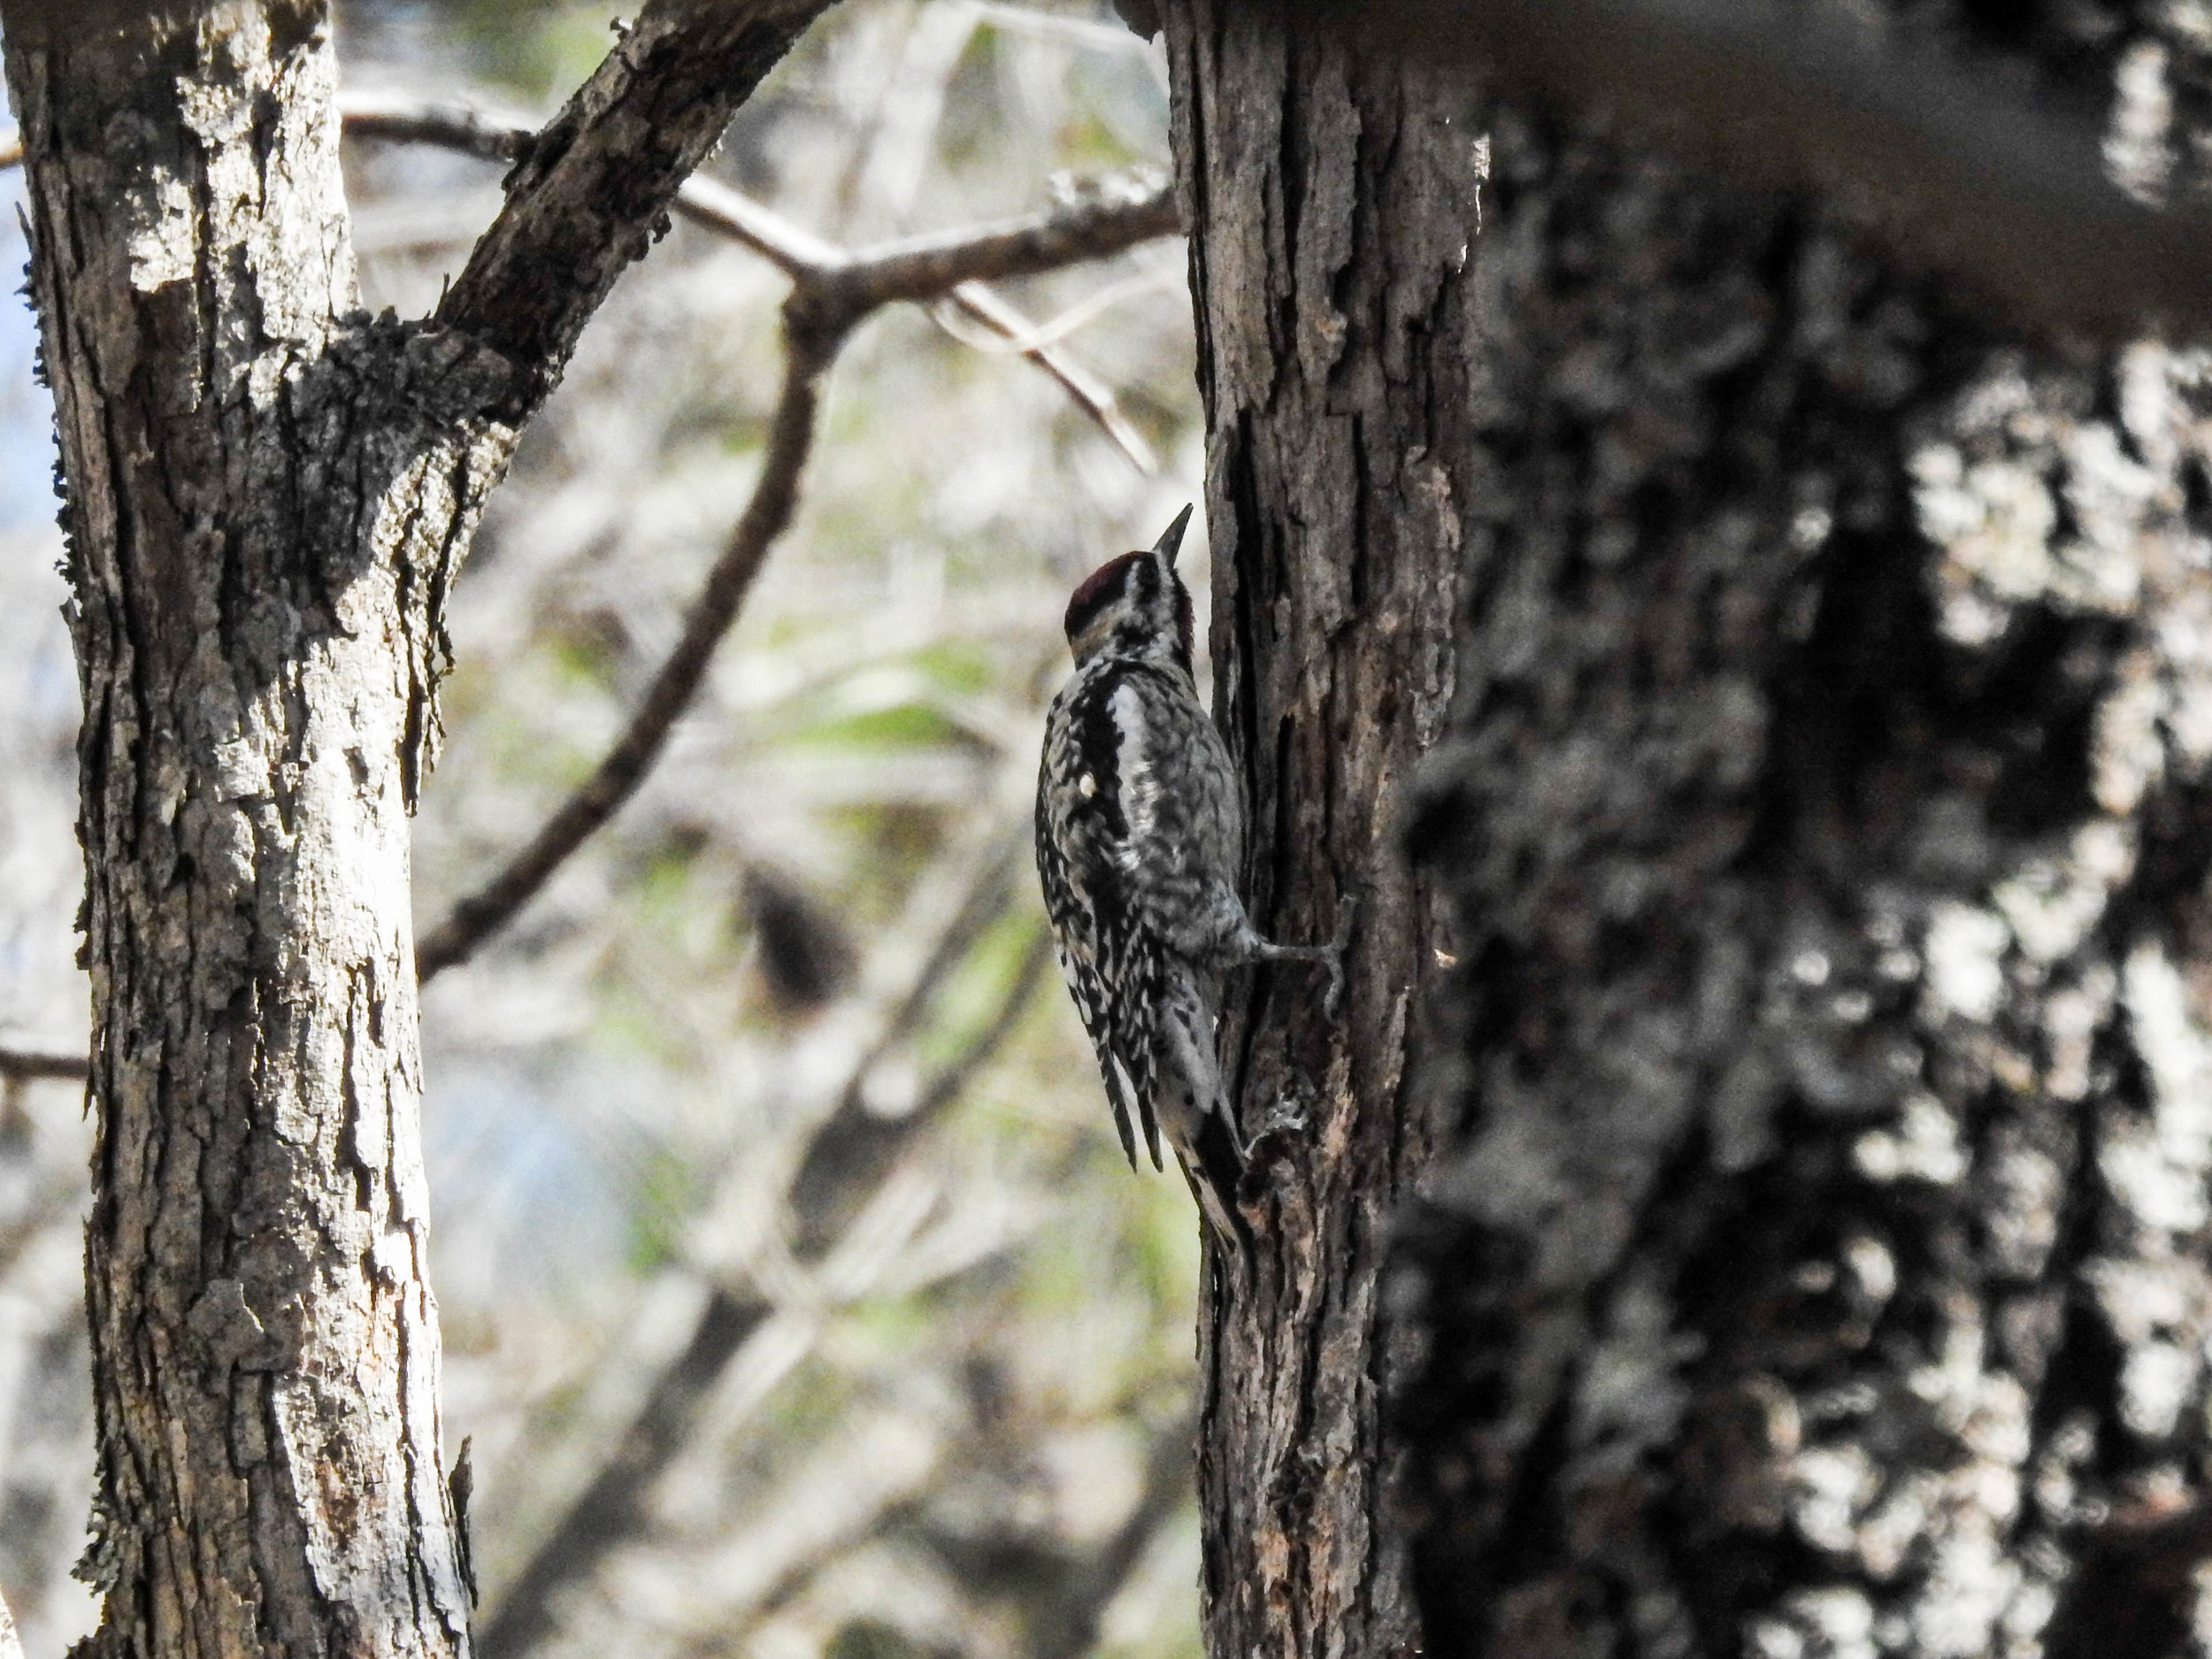 Yellow-bellied Sapsucker, March 4, 2017